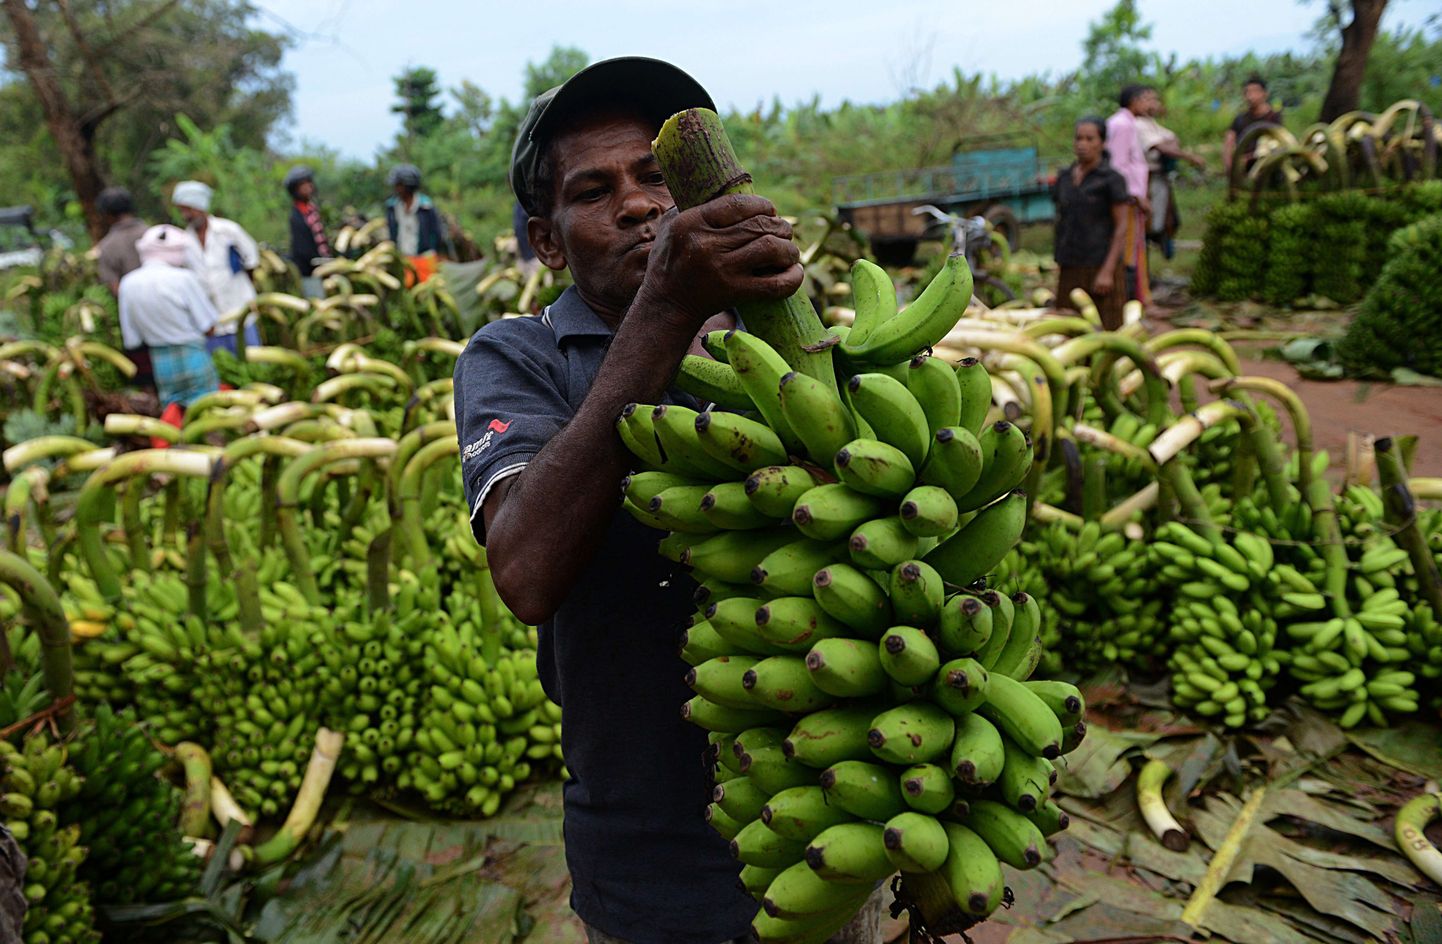 A Sri Lankan labourer unloads bananas at a banana market in Sevanagala some 120kms south-east of Colombo on March 26, 2013. Sri Lanka's economy grew by more than eight percent a year in the first full two years after security forces ended a war with Tamil Tiger rebels in May 2009. Some 100,000 people were killed in 37 years of fighting. AFP PHOTO/Ishara S. KODIKARA